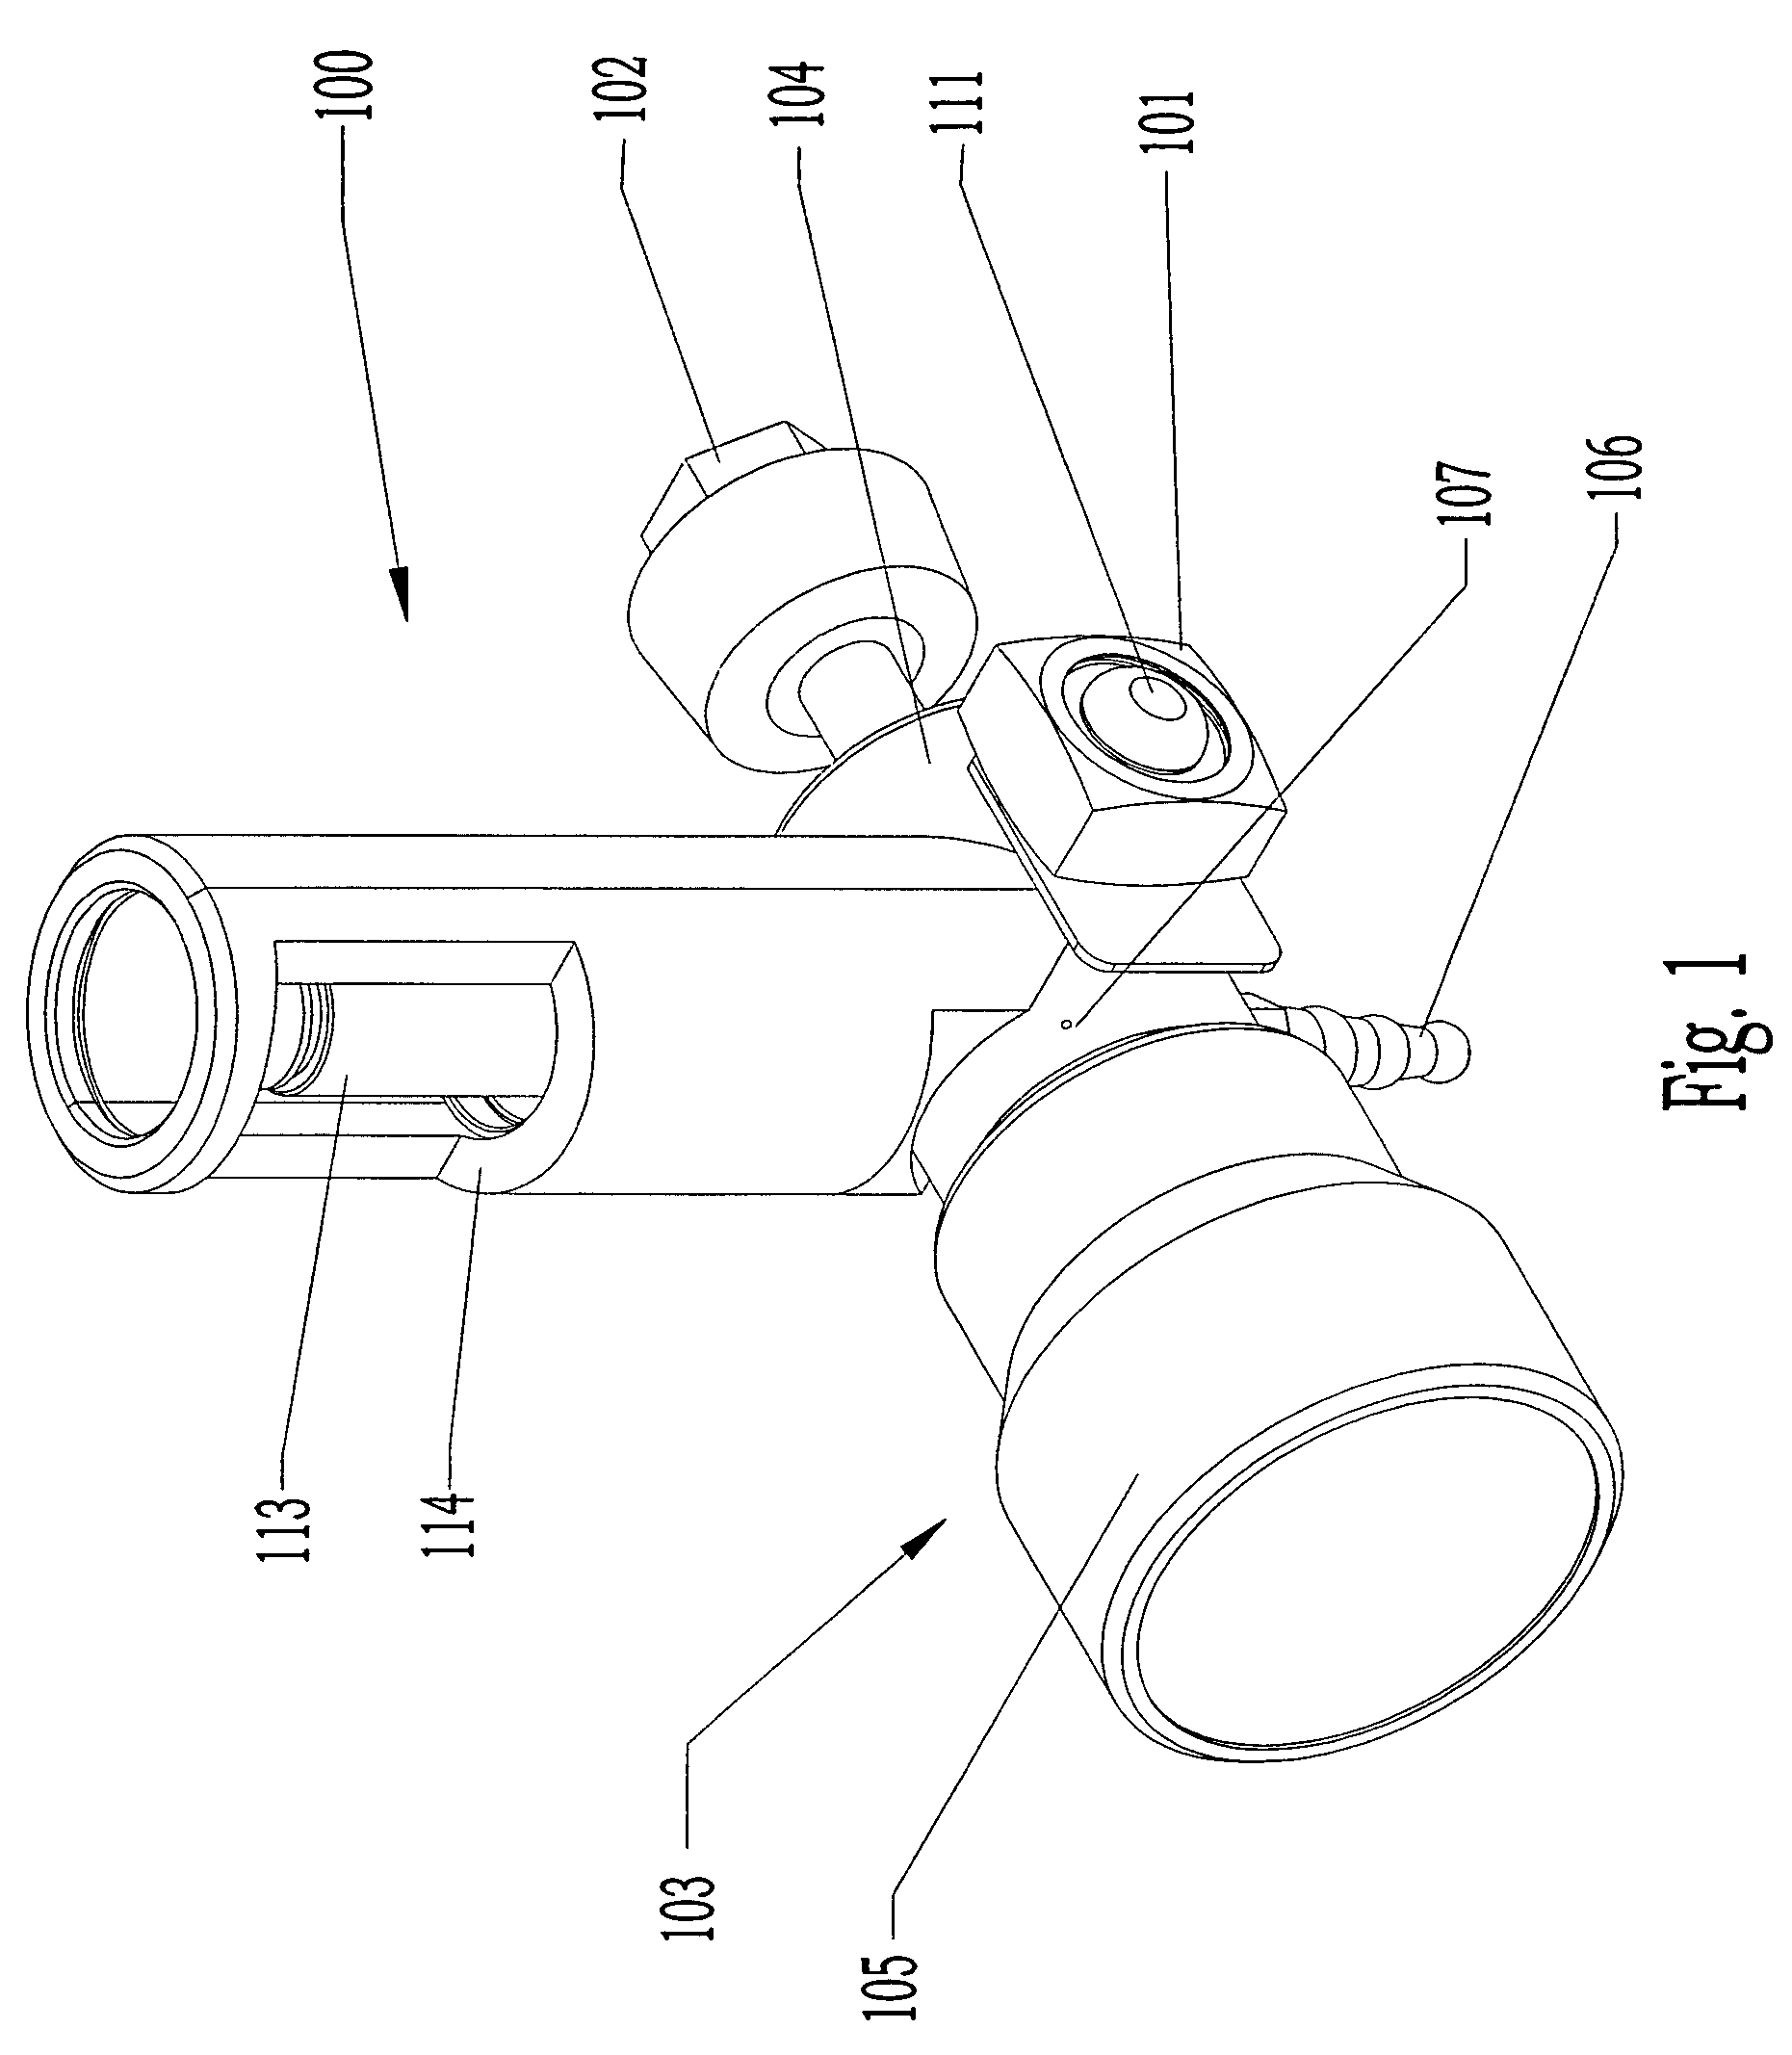 Suction control apparatus and methods for maintaining fluid flow without compromising sterile lines